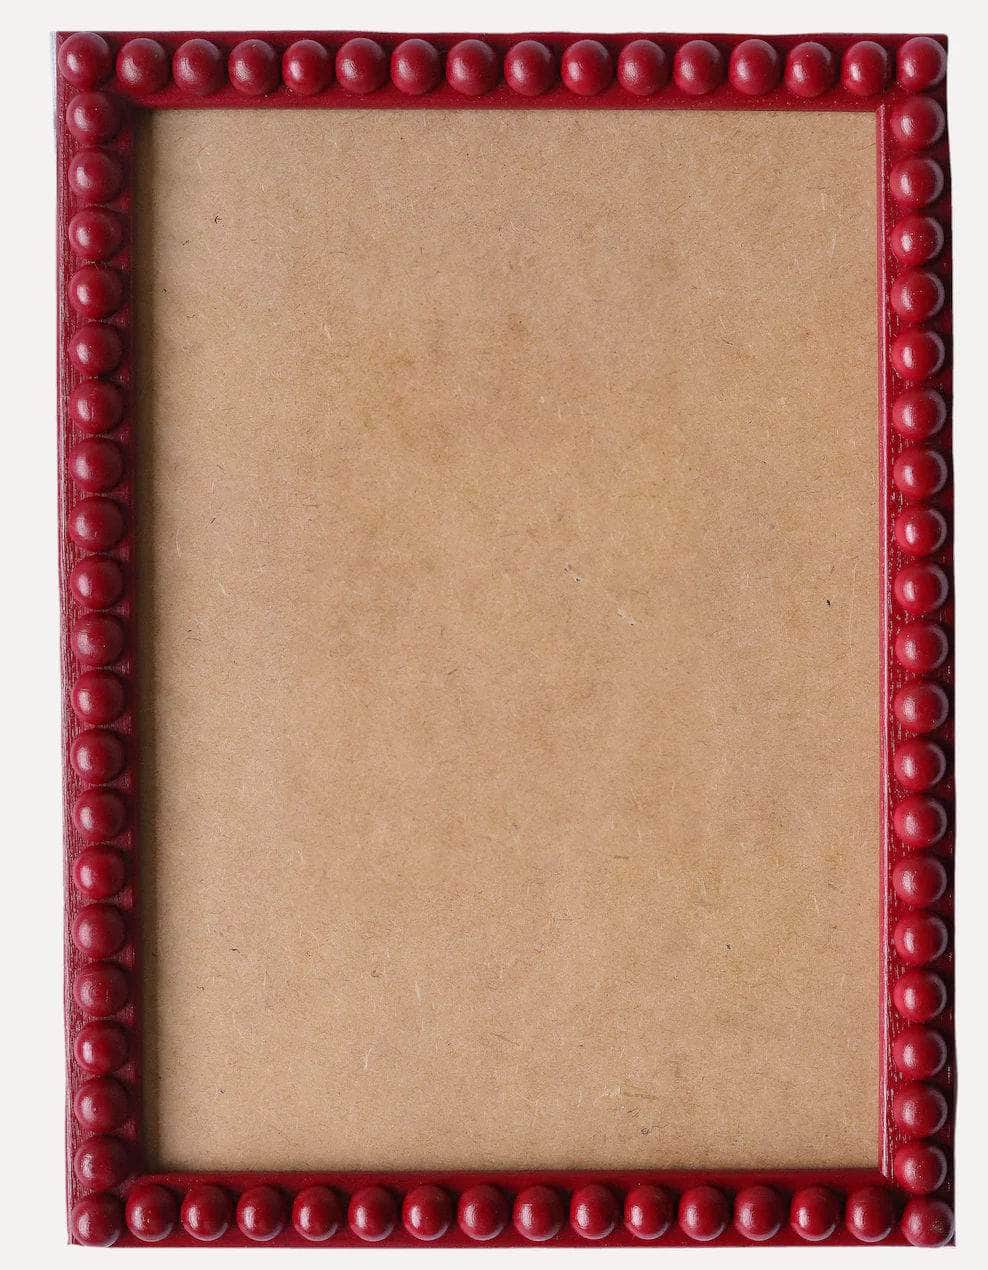 Cranberry Stained Bobbin Frame